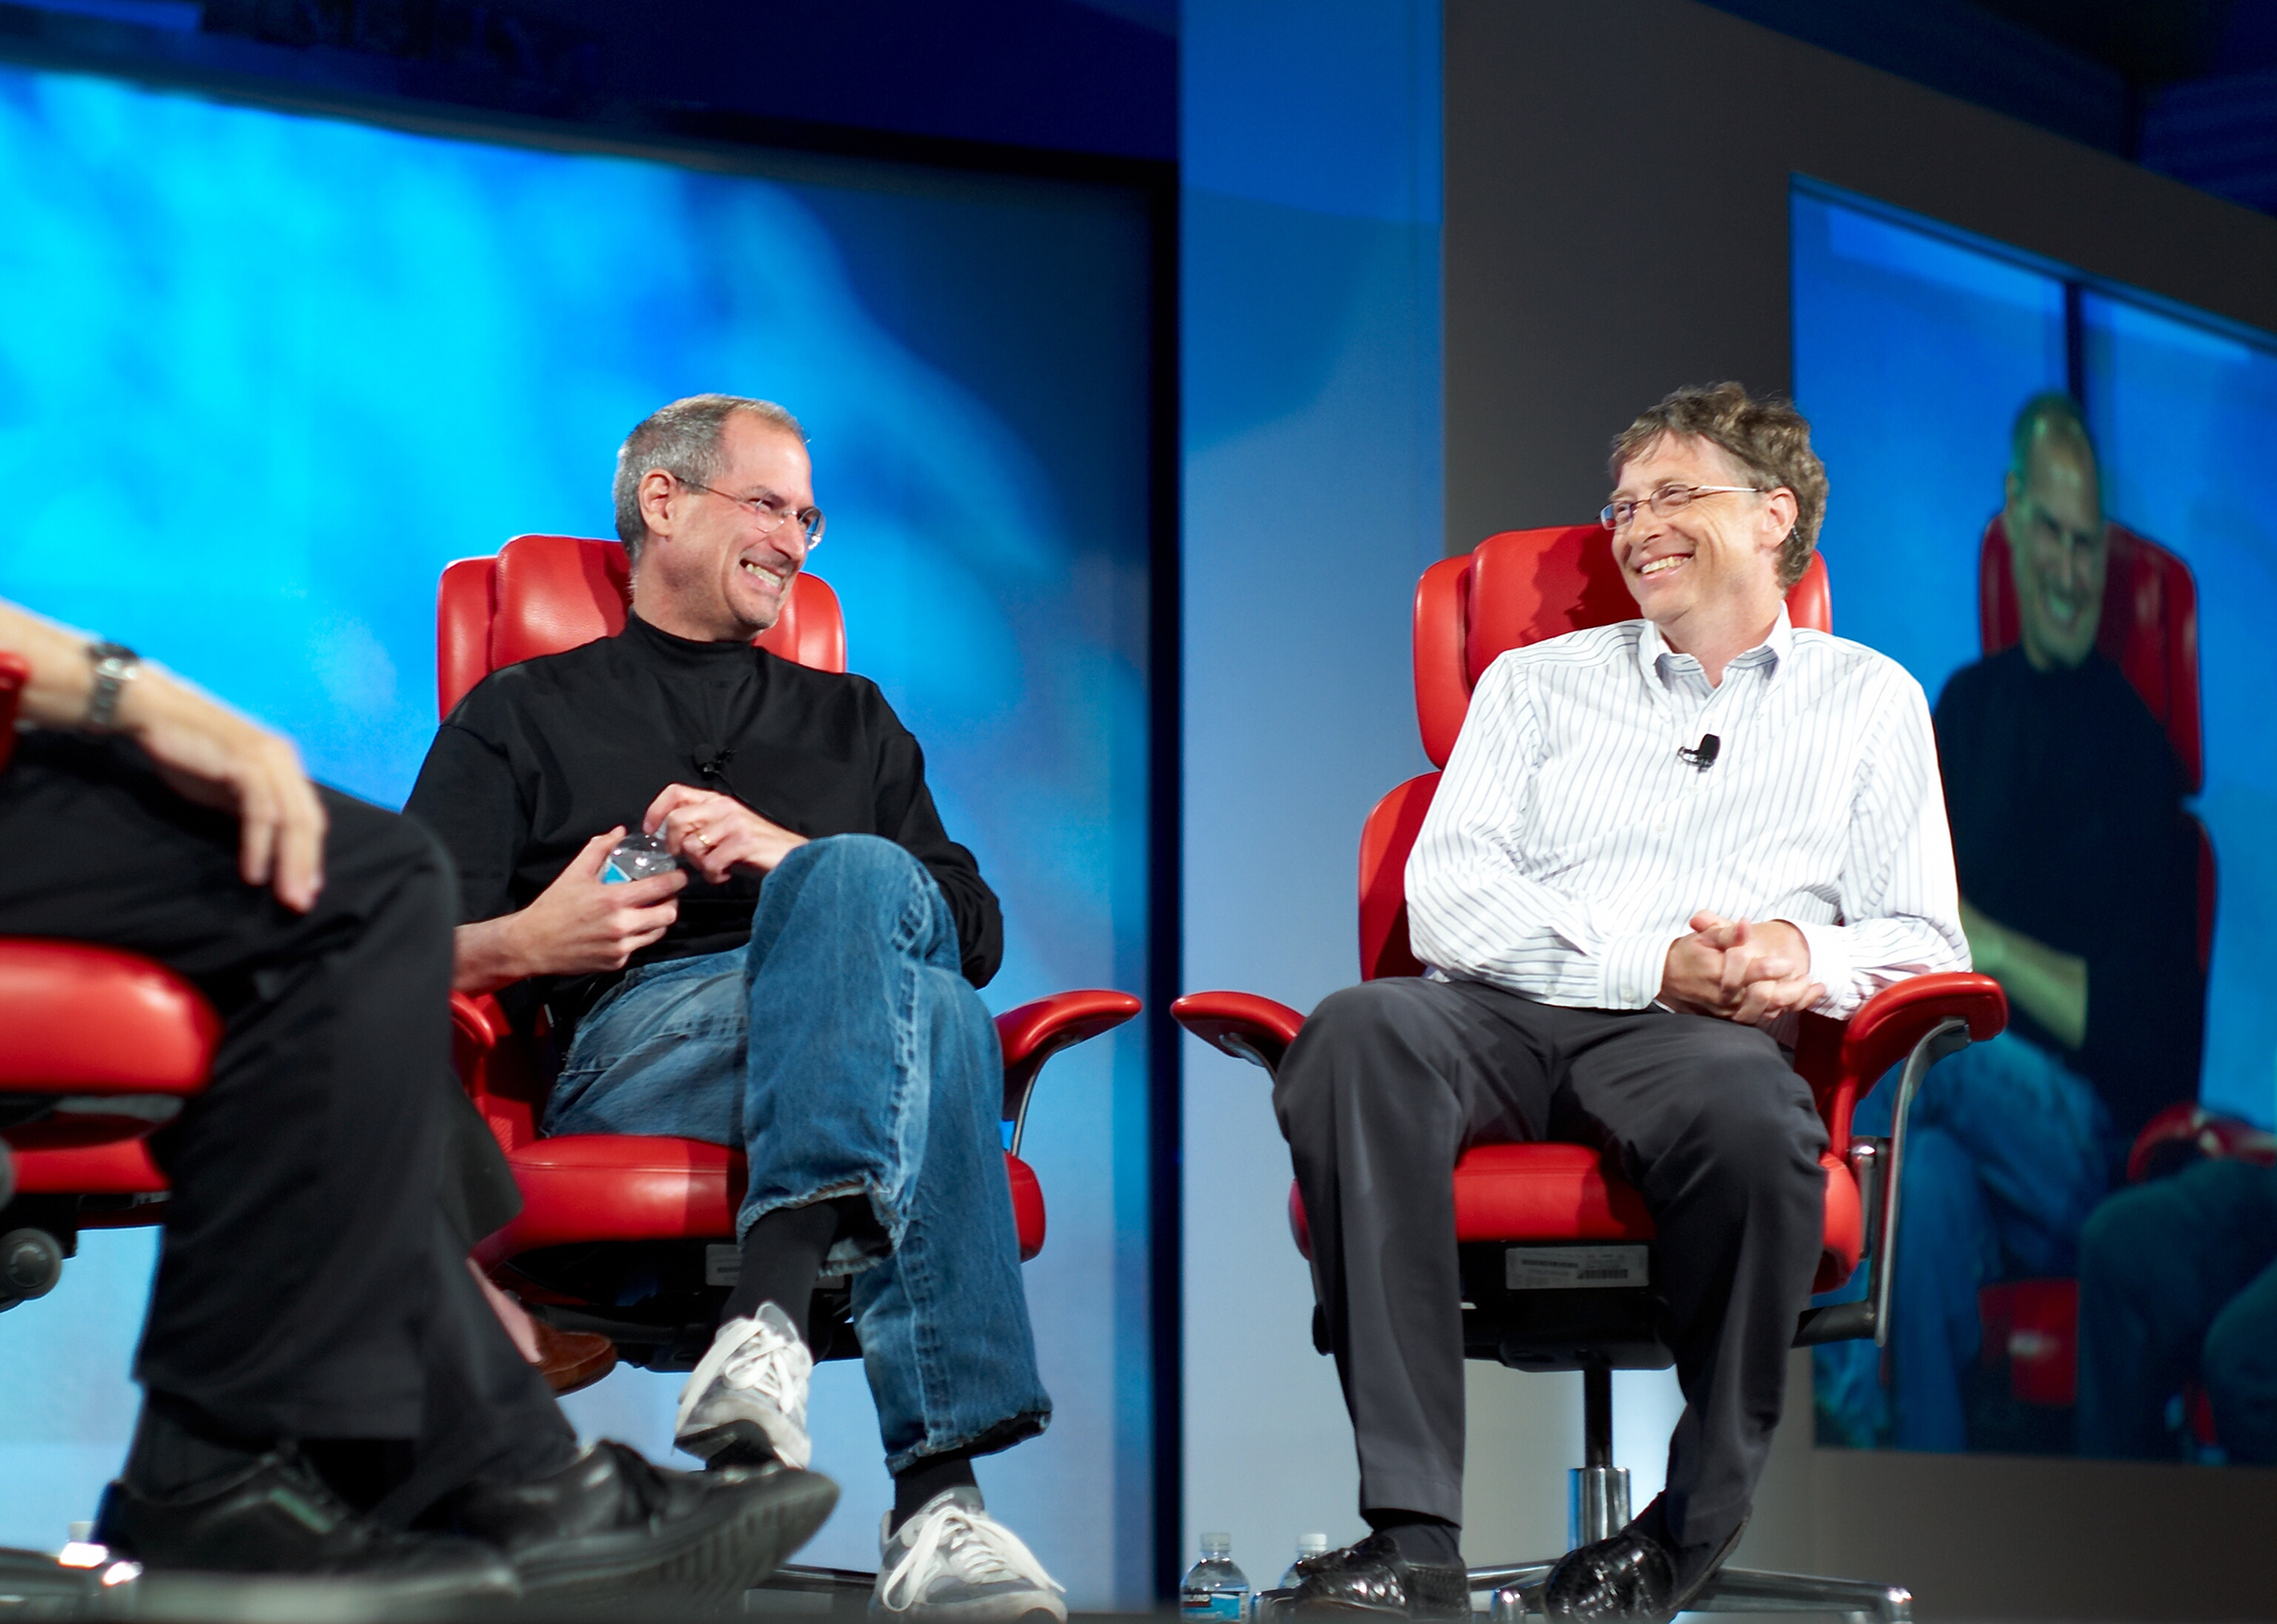 Bill Gates and Steve Jobs at All Things Digital 5 Conference, May 2007 (images on: OpenStreetMap — Google Earth)